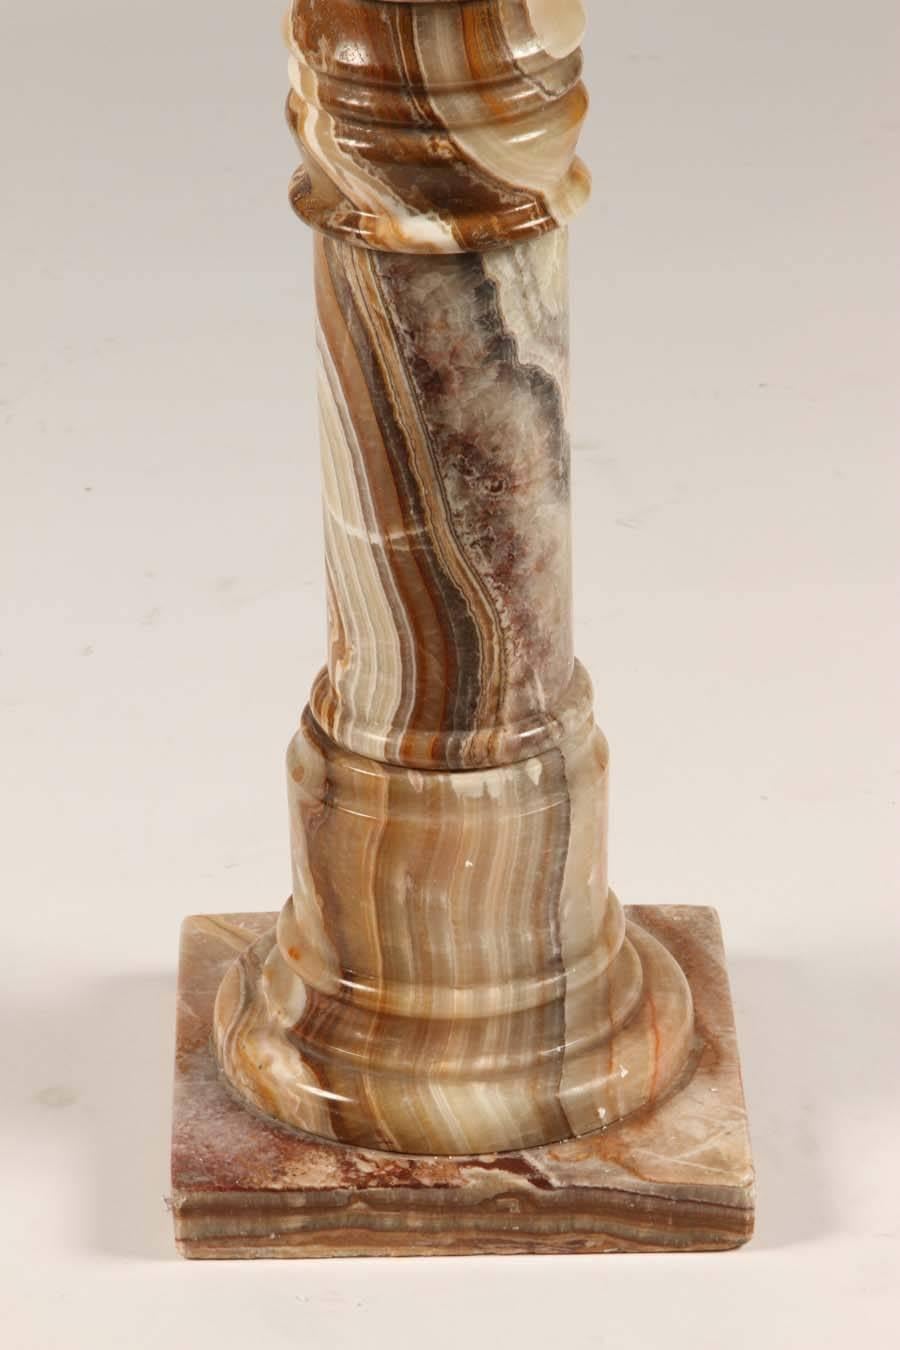 Marble column with simply magnificent striations in brown, gold, and cream. This would be a fantastic support for an urn, bust or vase filled with a fresh arrangement of flowers.